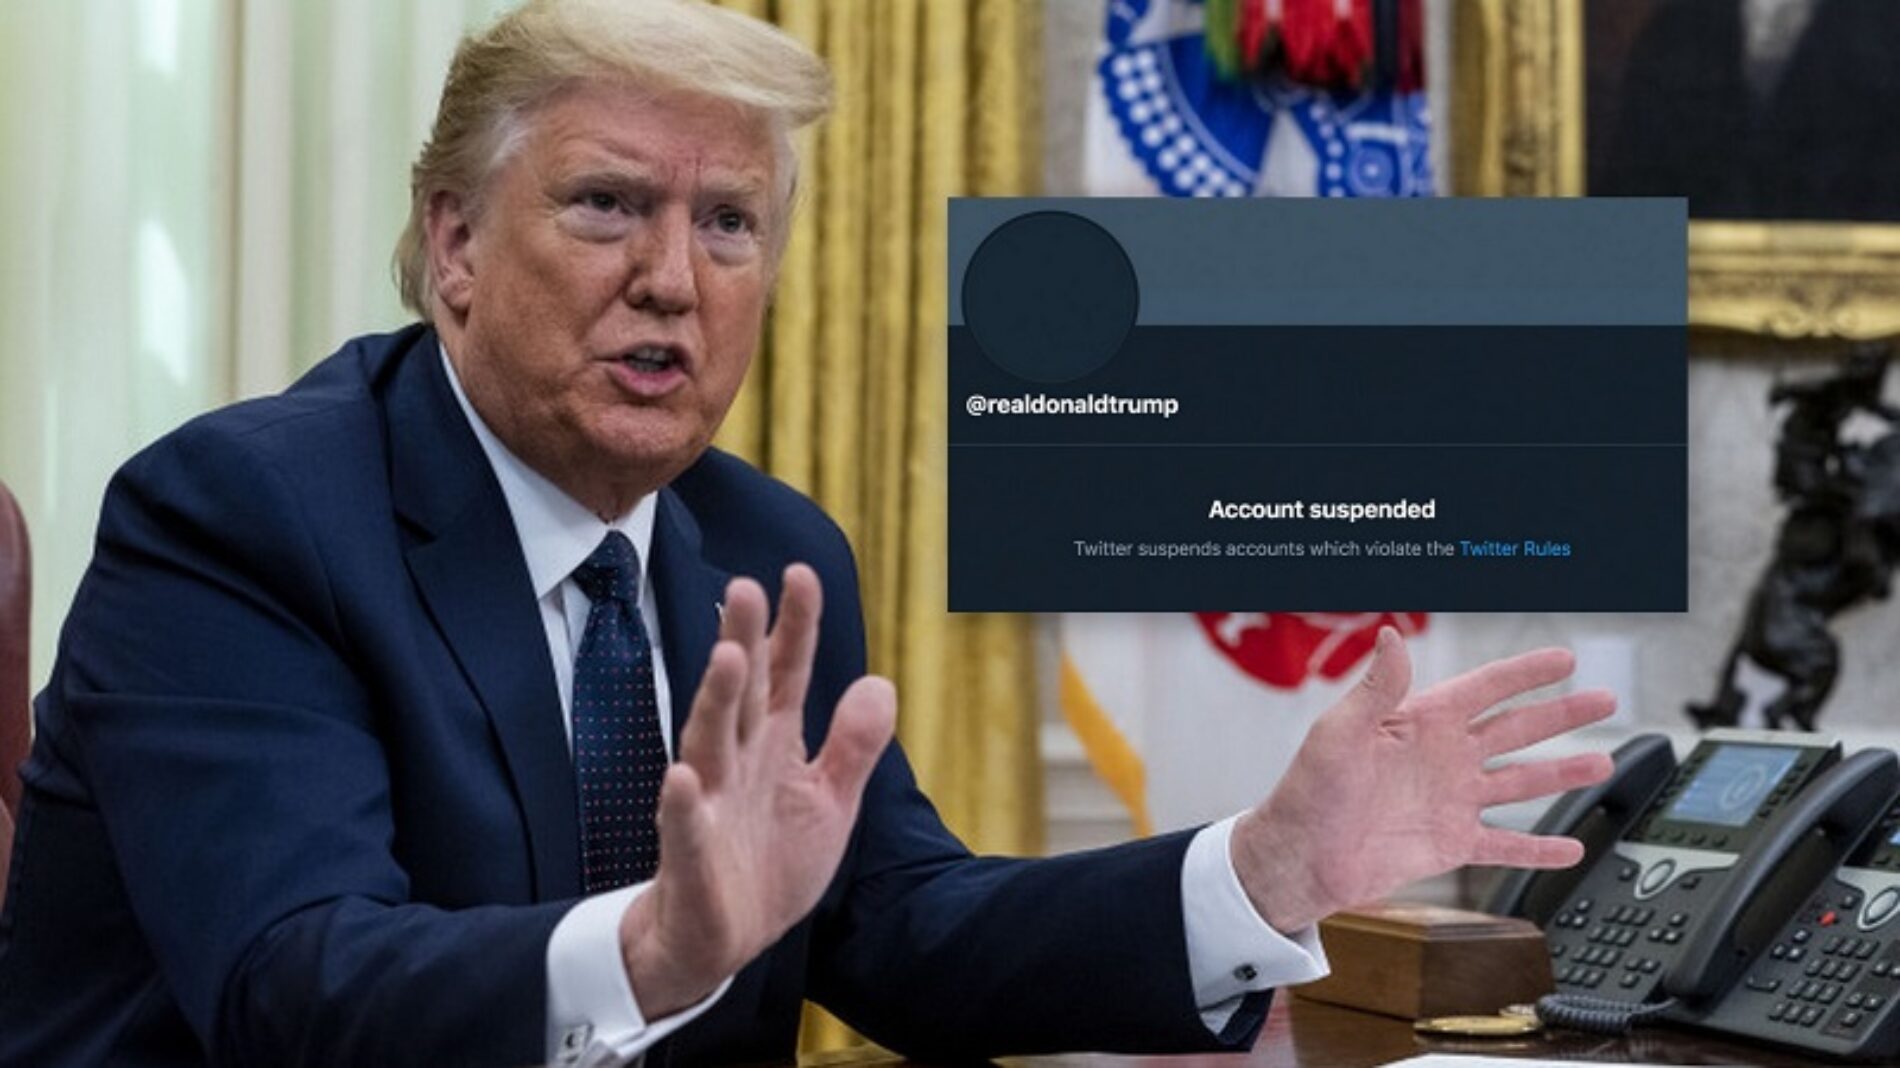 Twitter Permanently Suspends Donald Trump’s Account; President Vows “We Will Not Be Silenced”